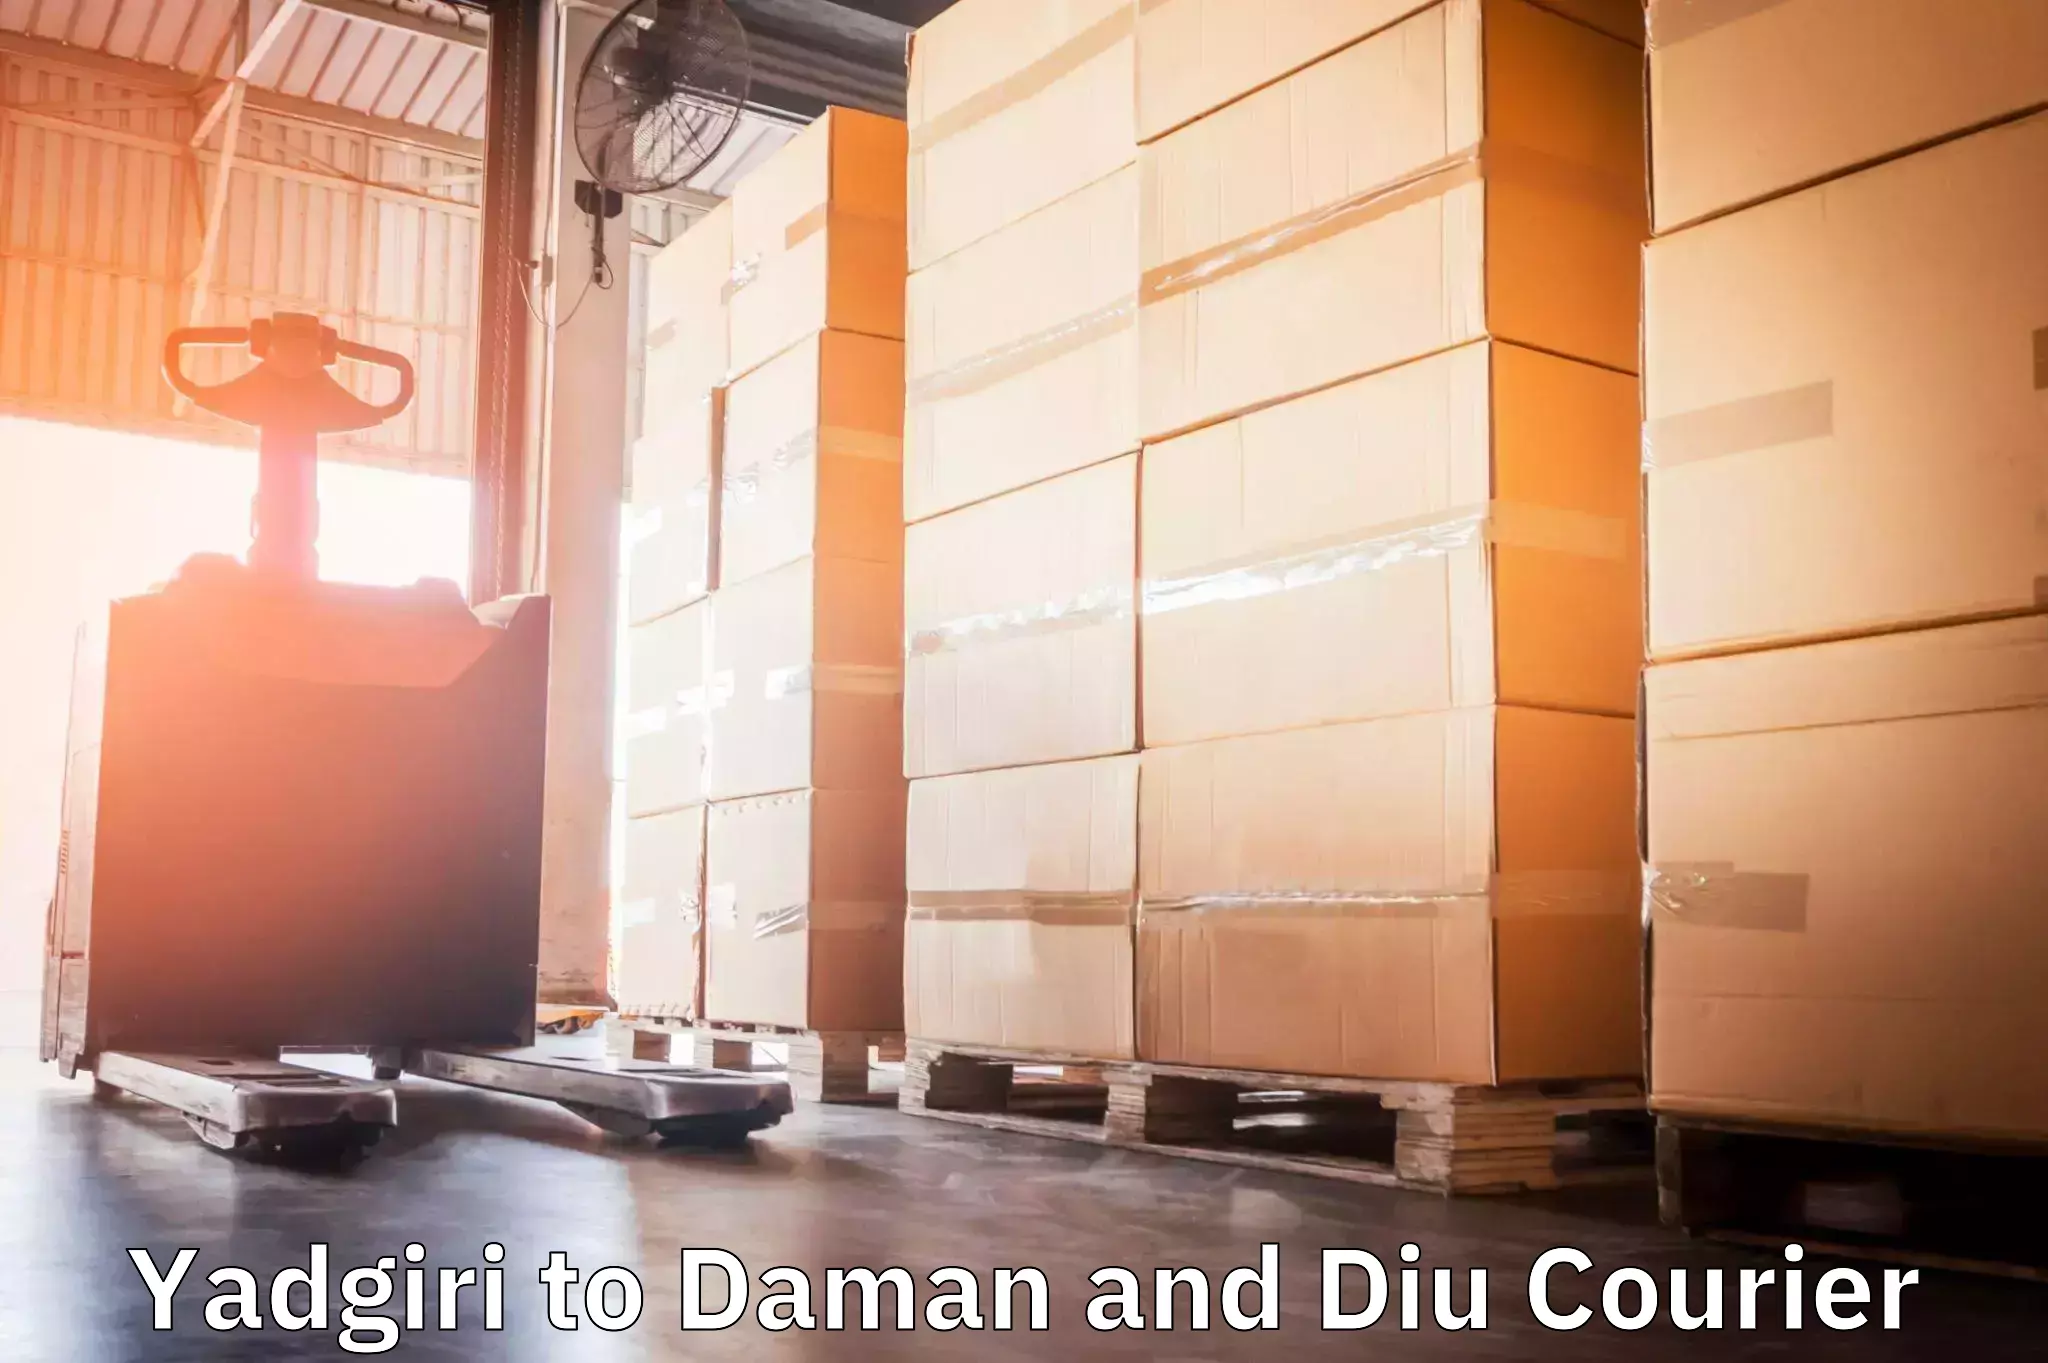 Reliable parcel services Yadgiri to Daman and Diu